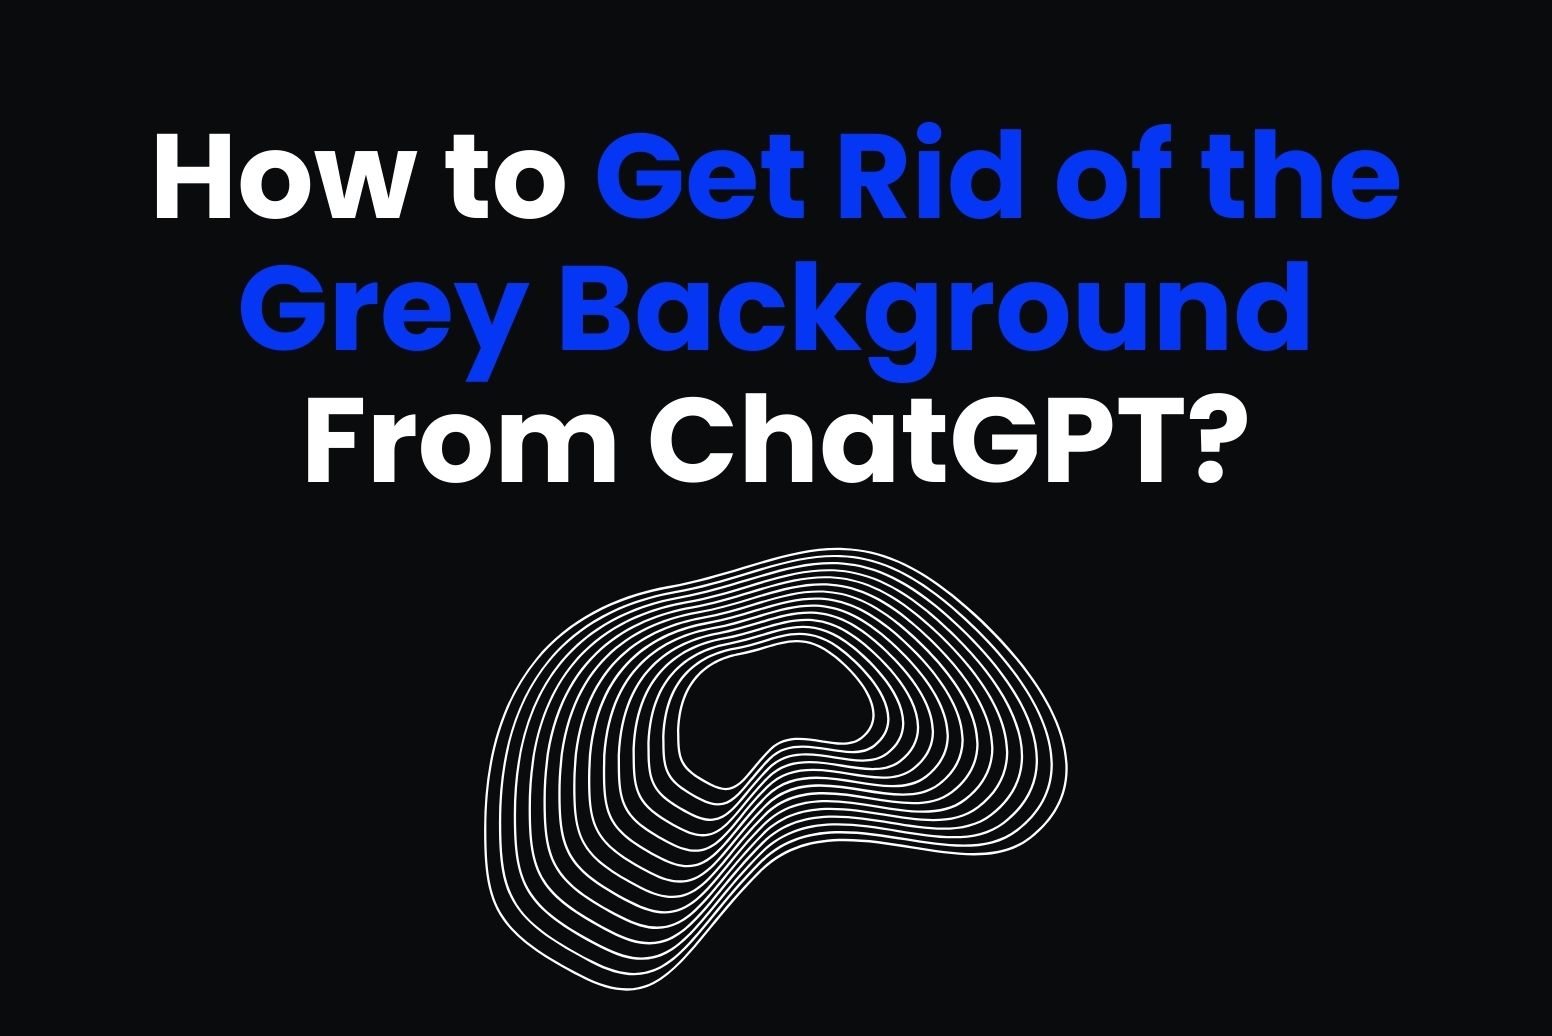 How to Get Rid of the Grey Background From ChatGPT